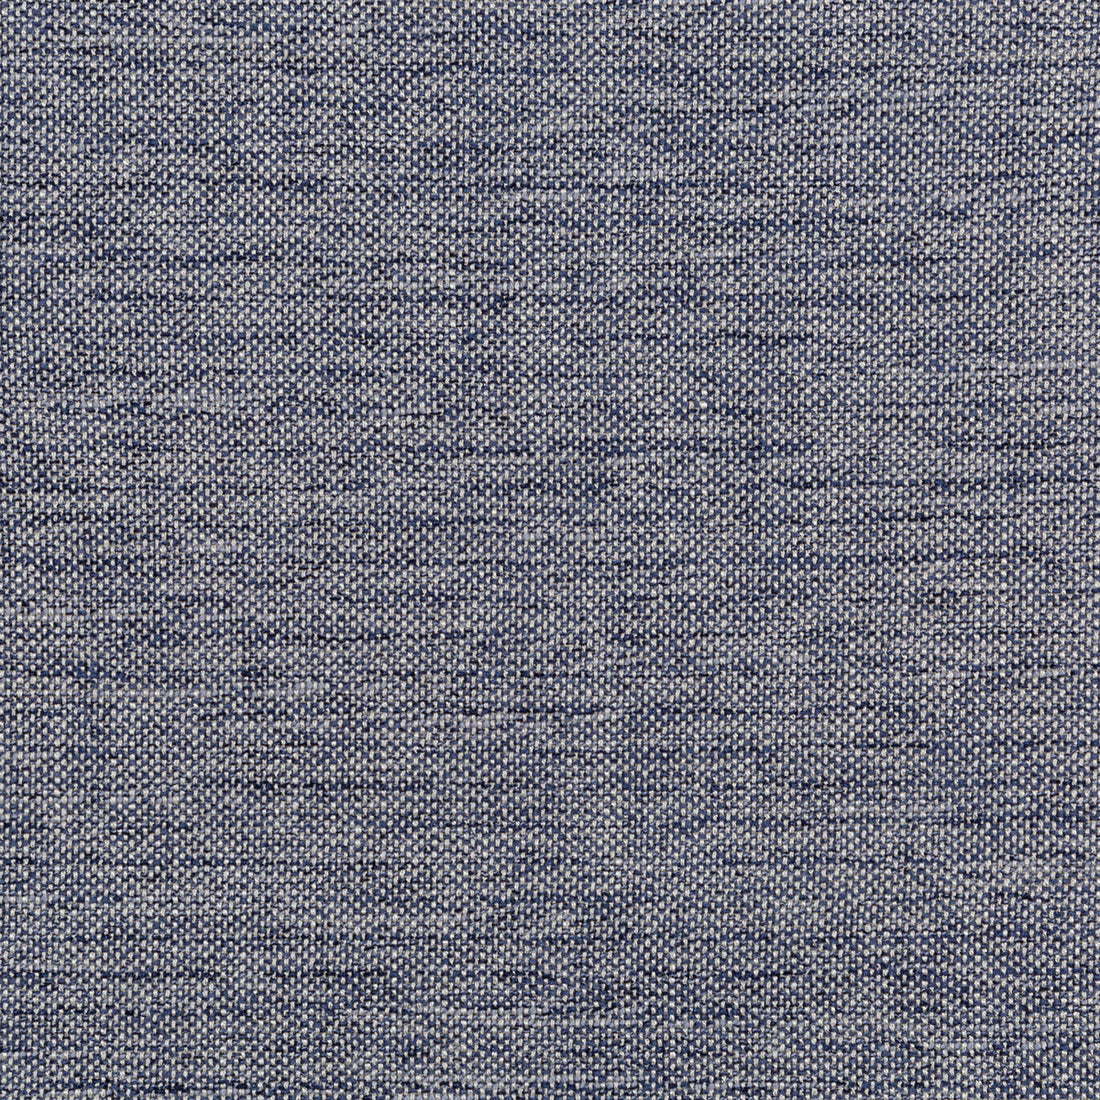 Kravet Smart fabric in 35989-50 color - pattern 35989.50.0 - by Kravet Smart in the Performance Crypton Home collection